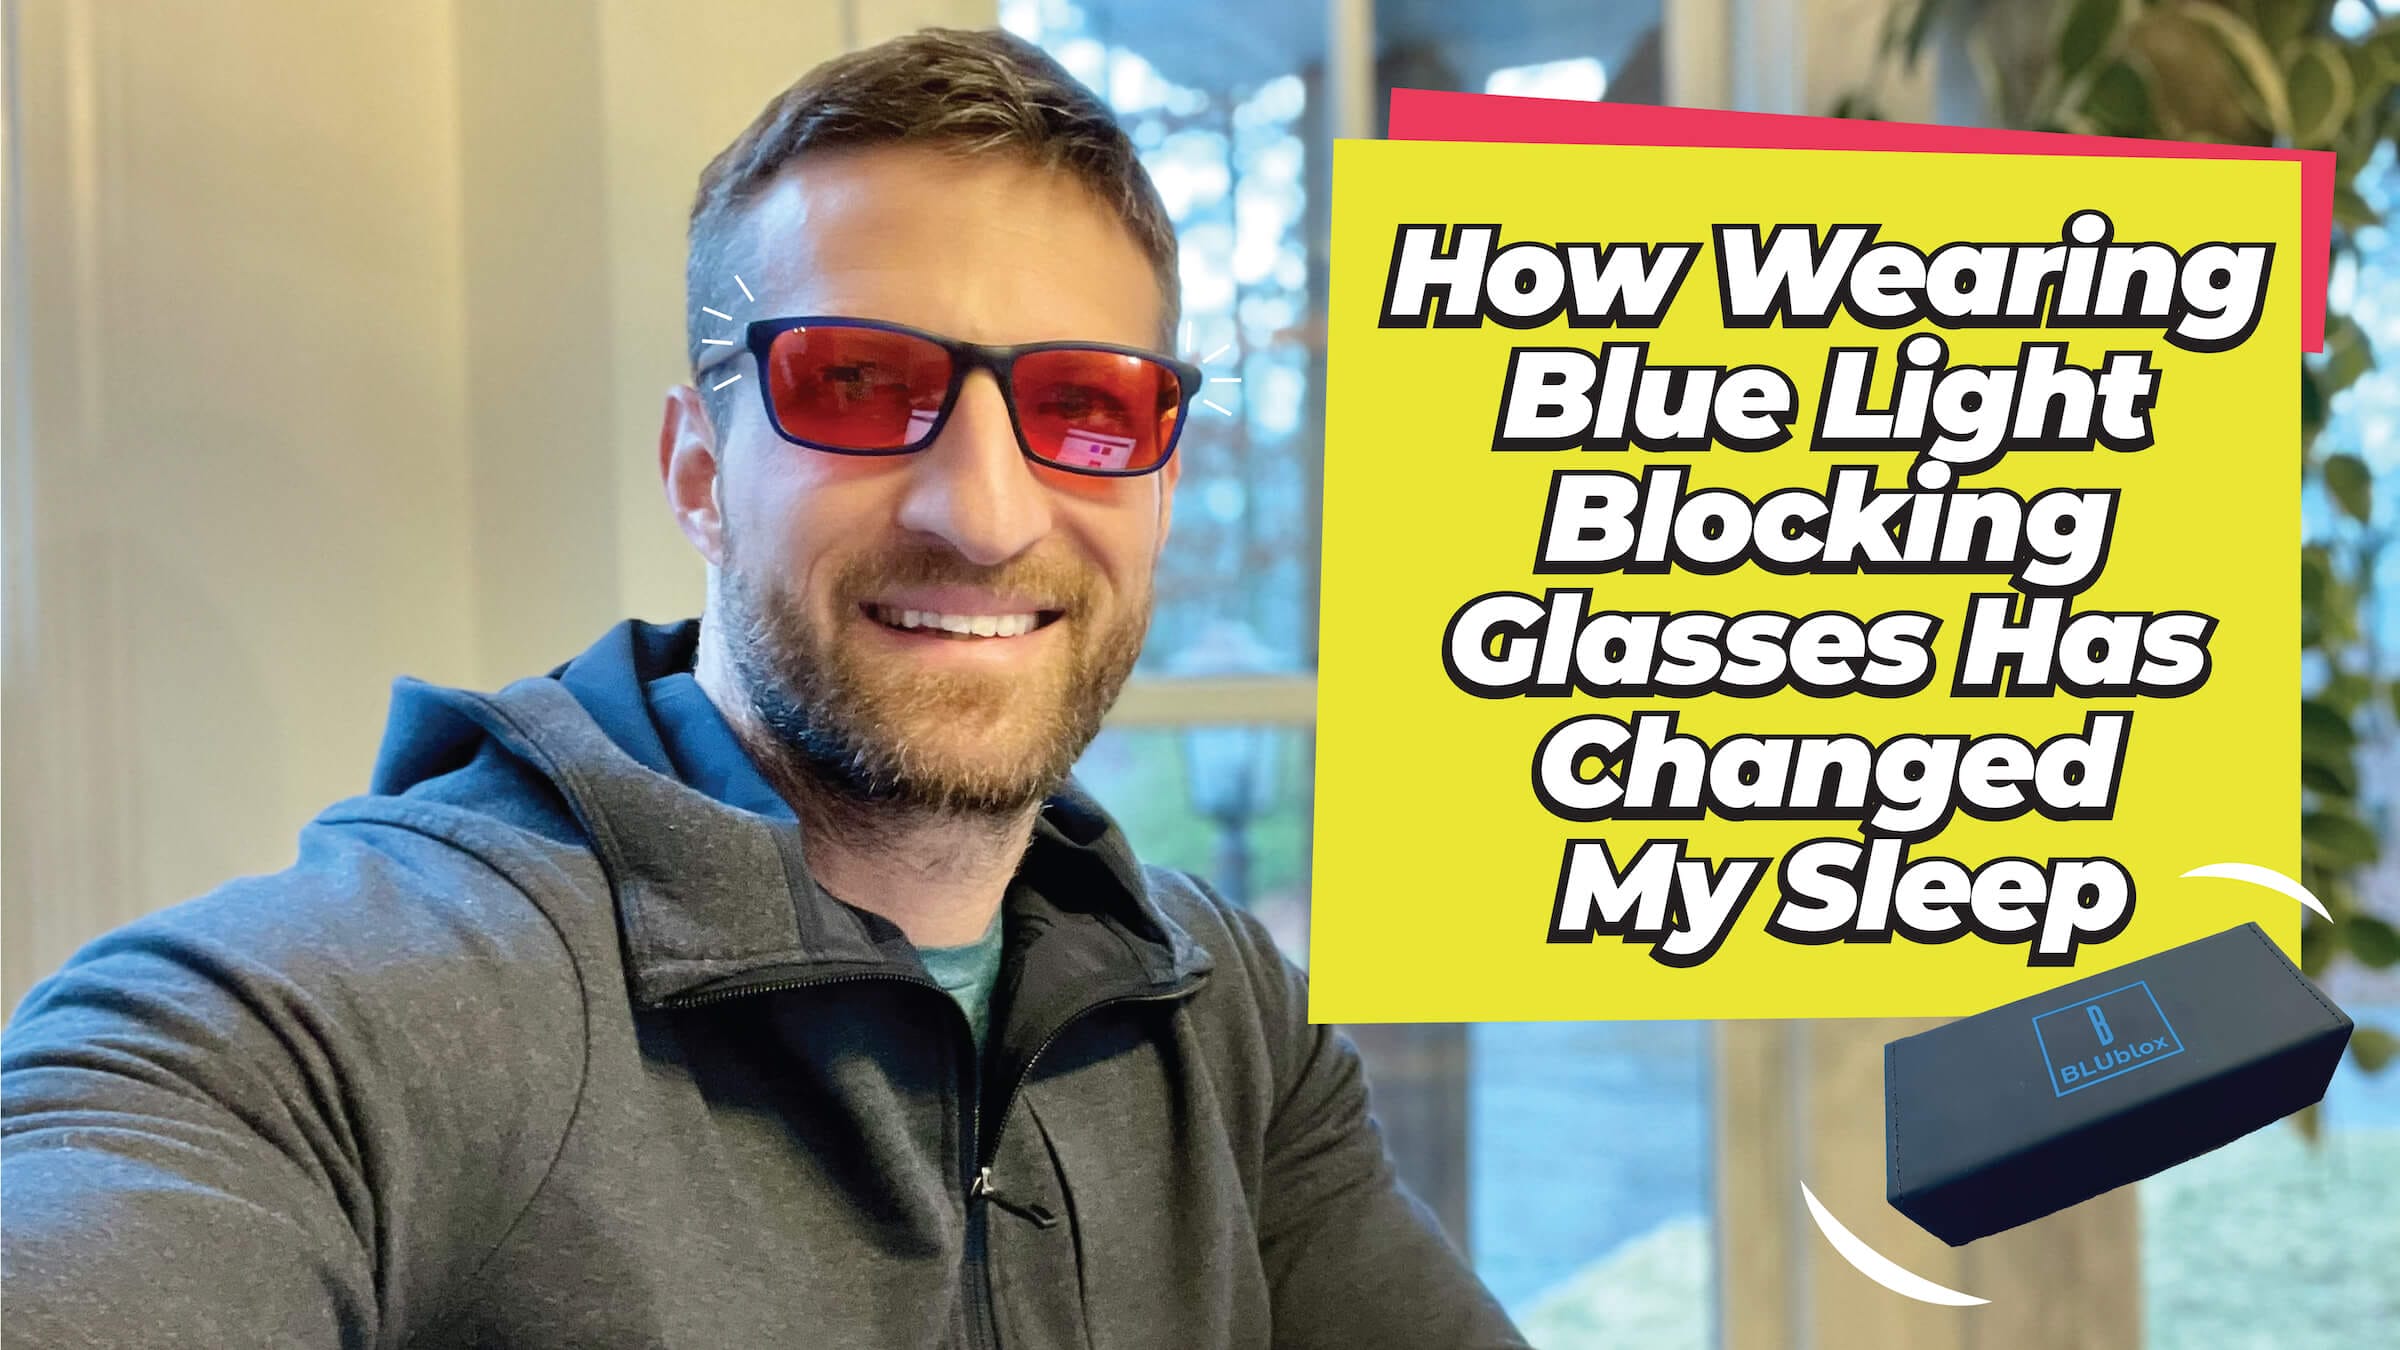 YouTube Video: Why BLUblox Are the Best Blue Light Blocking Glasses You Can Buy